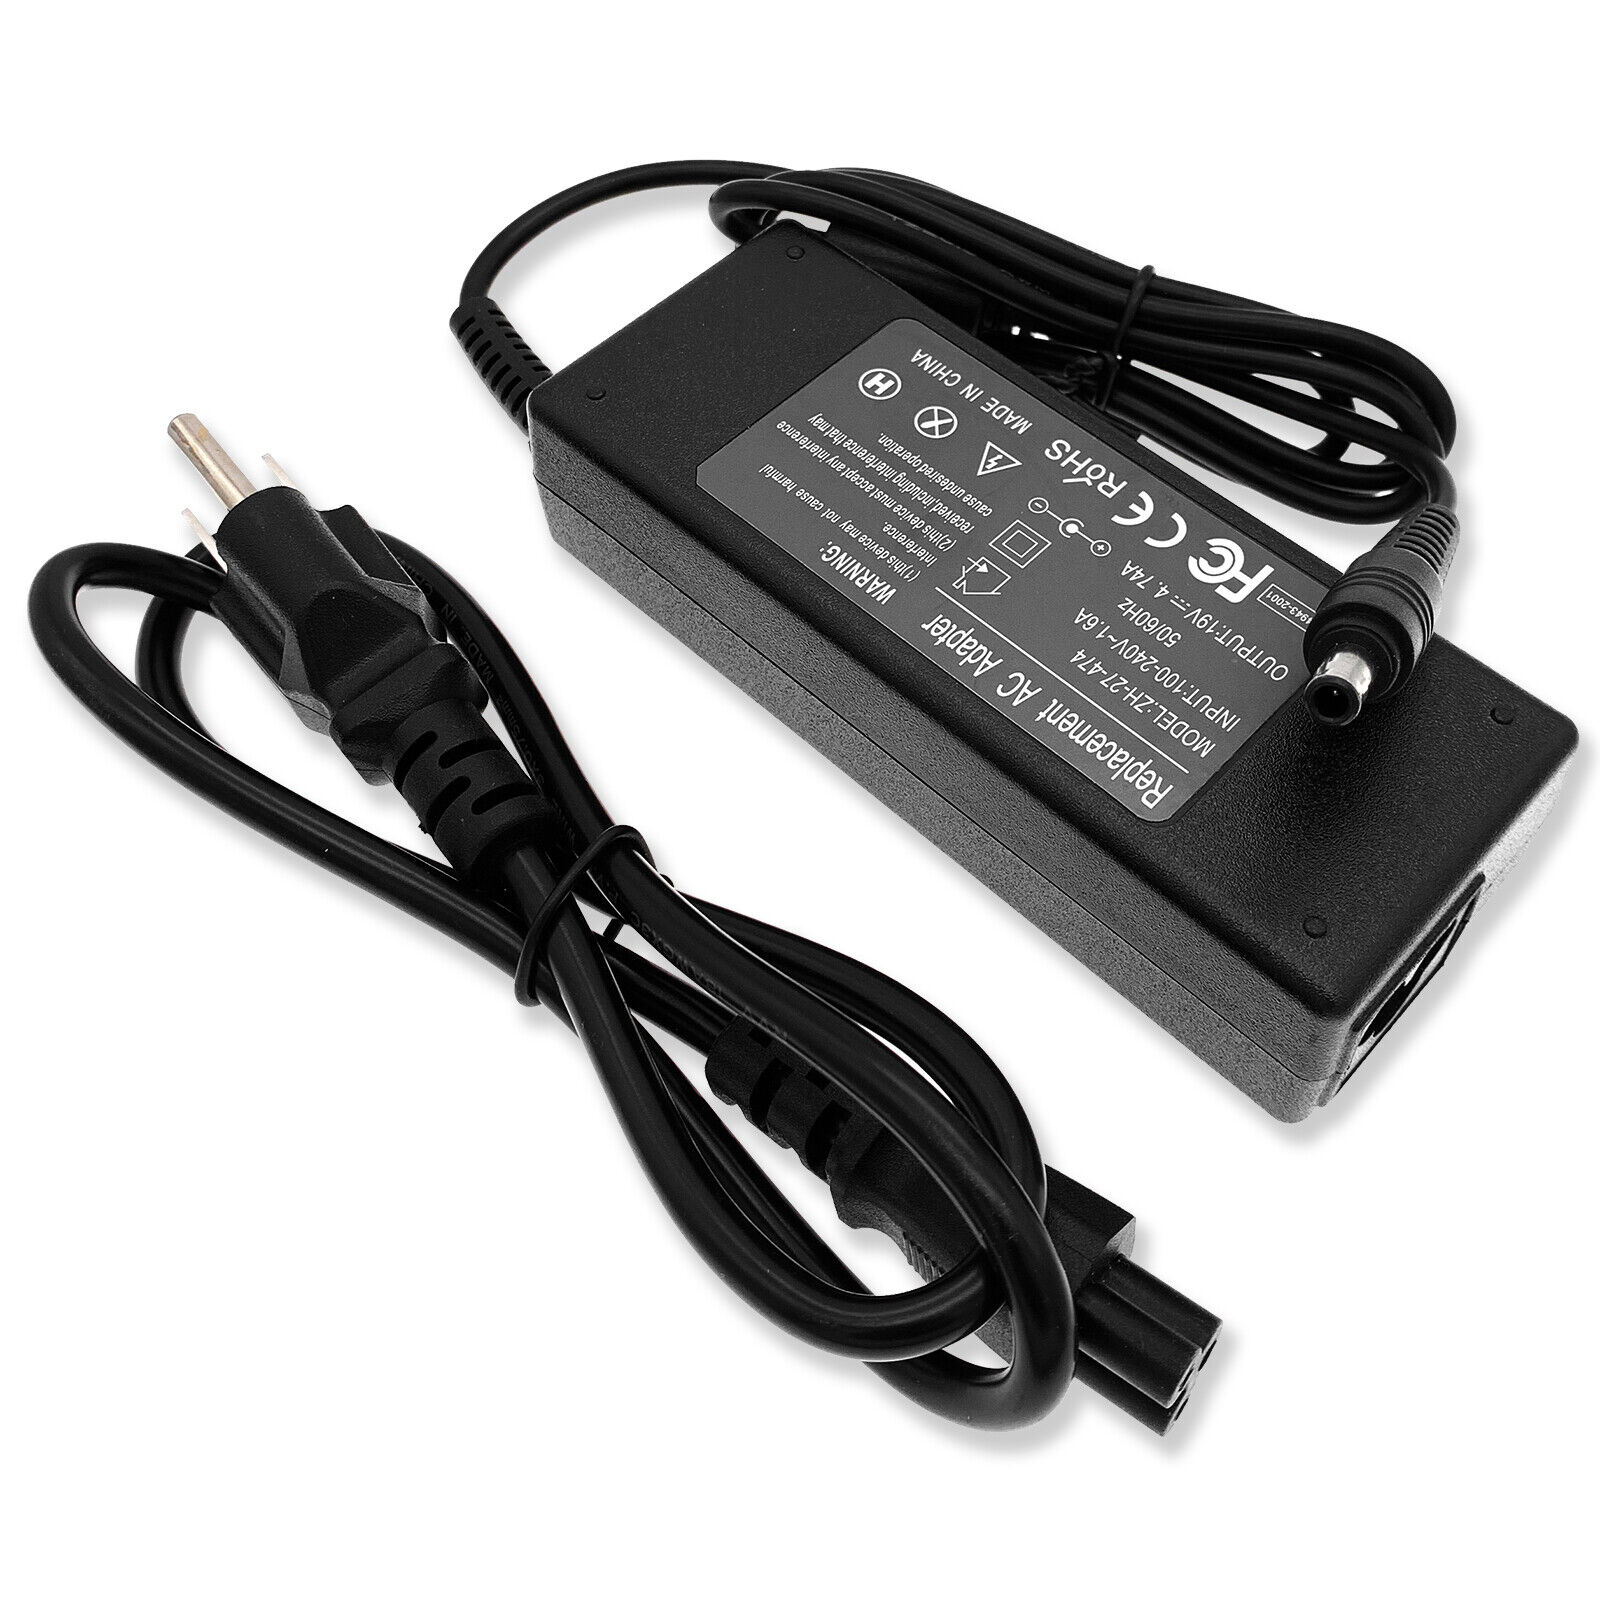 AC Power Adapter Charger For SAMSUNG Np350v5c Np355v5c Np355e7c Np365e5c 90W